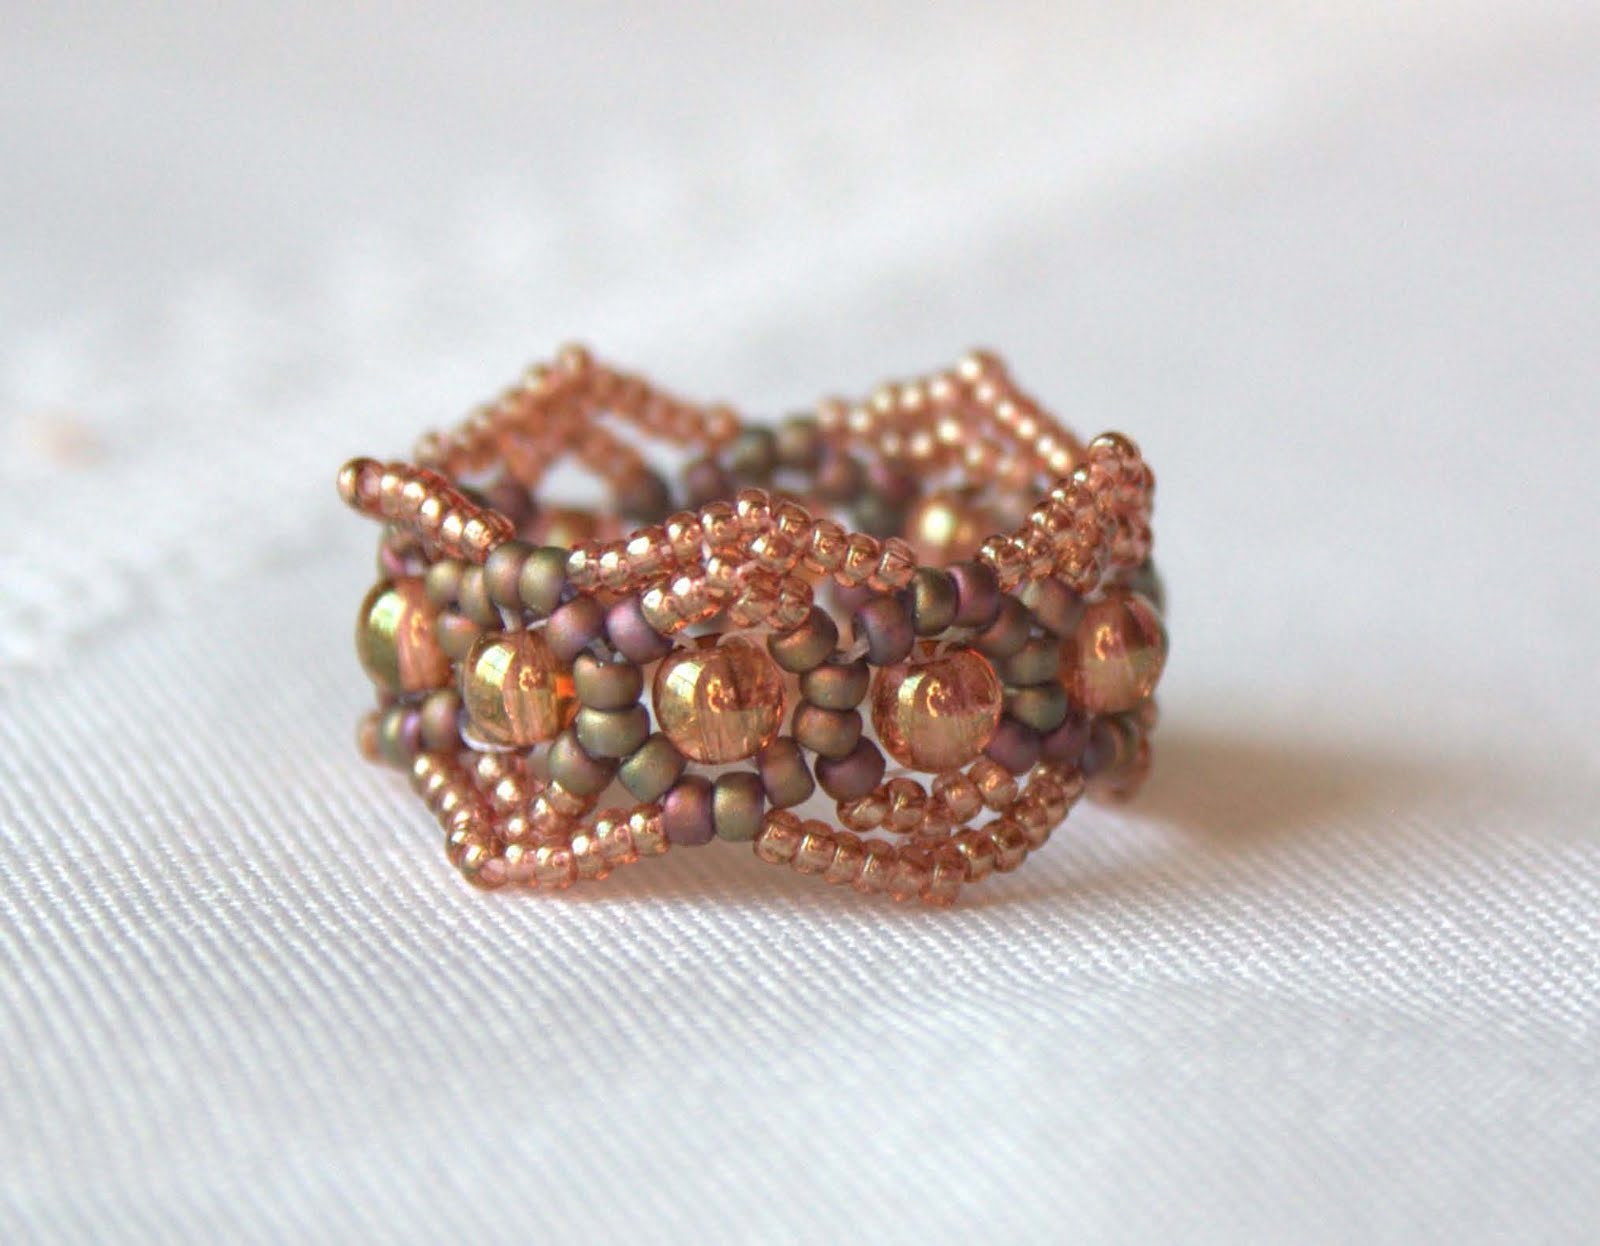 Beaded Bead Ring Free Pattern - Lots of Free Jewelry Making